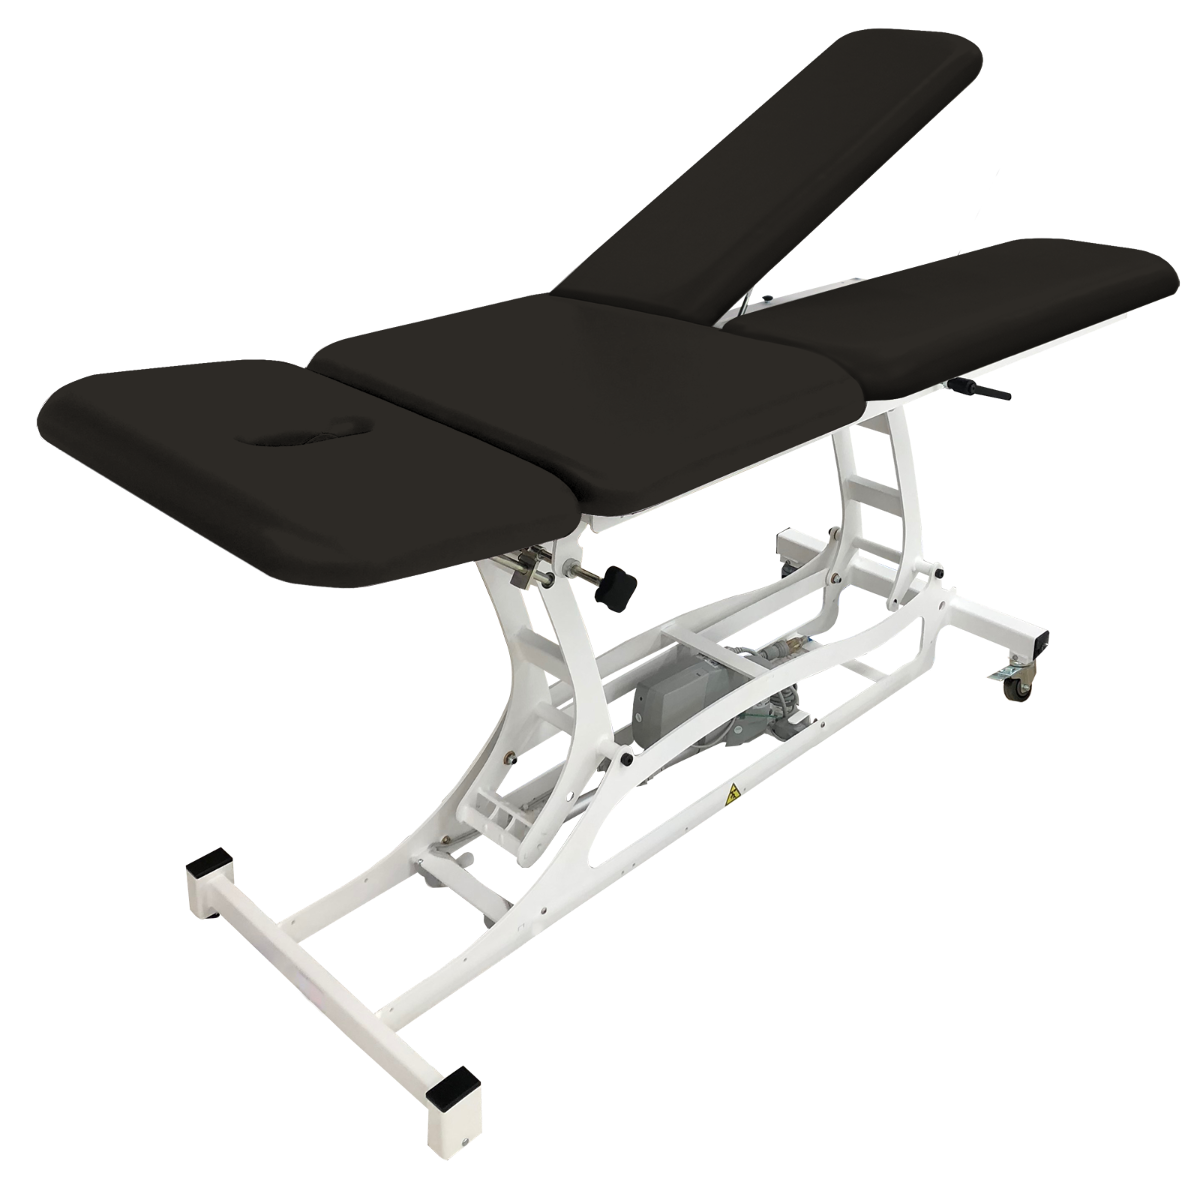 Essential Thera-P Electric Treatment Table